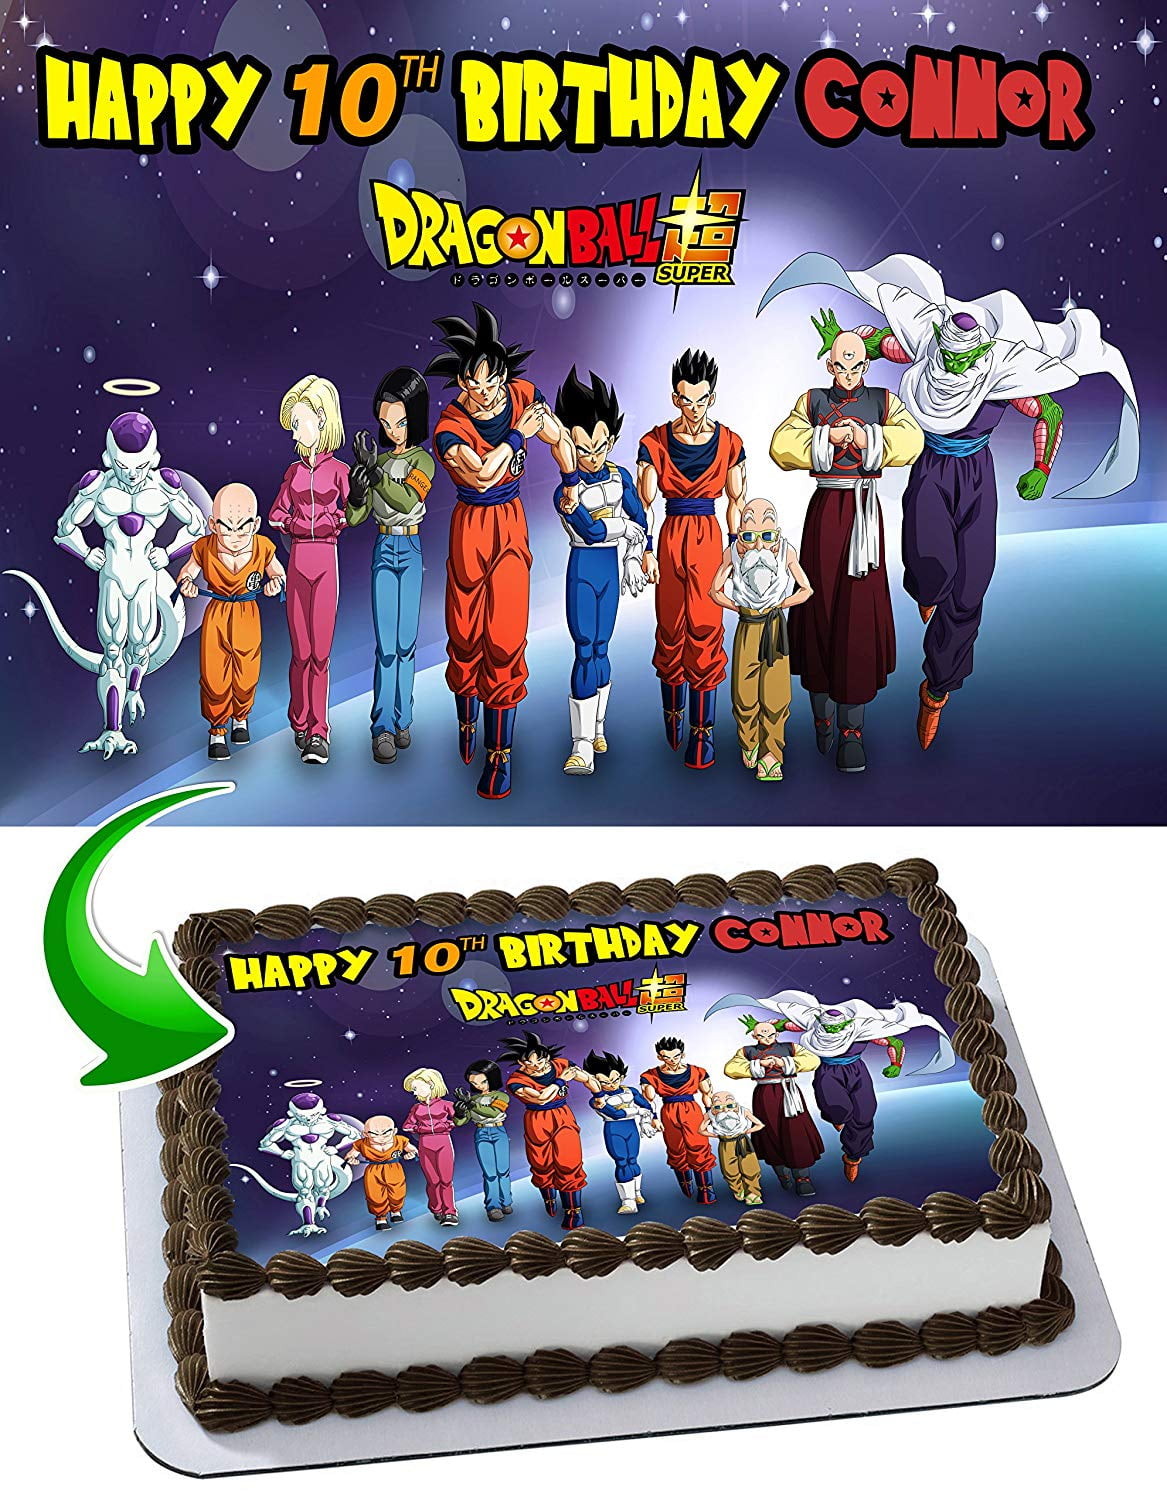 GOKU PARTY 7.5" PERSONALISED ROUND EDIBLE ICING CAKE TOPPER 4 DRAGON BALL Z 